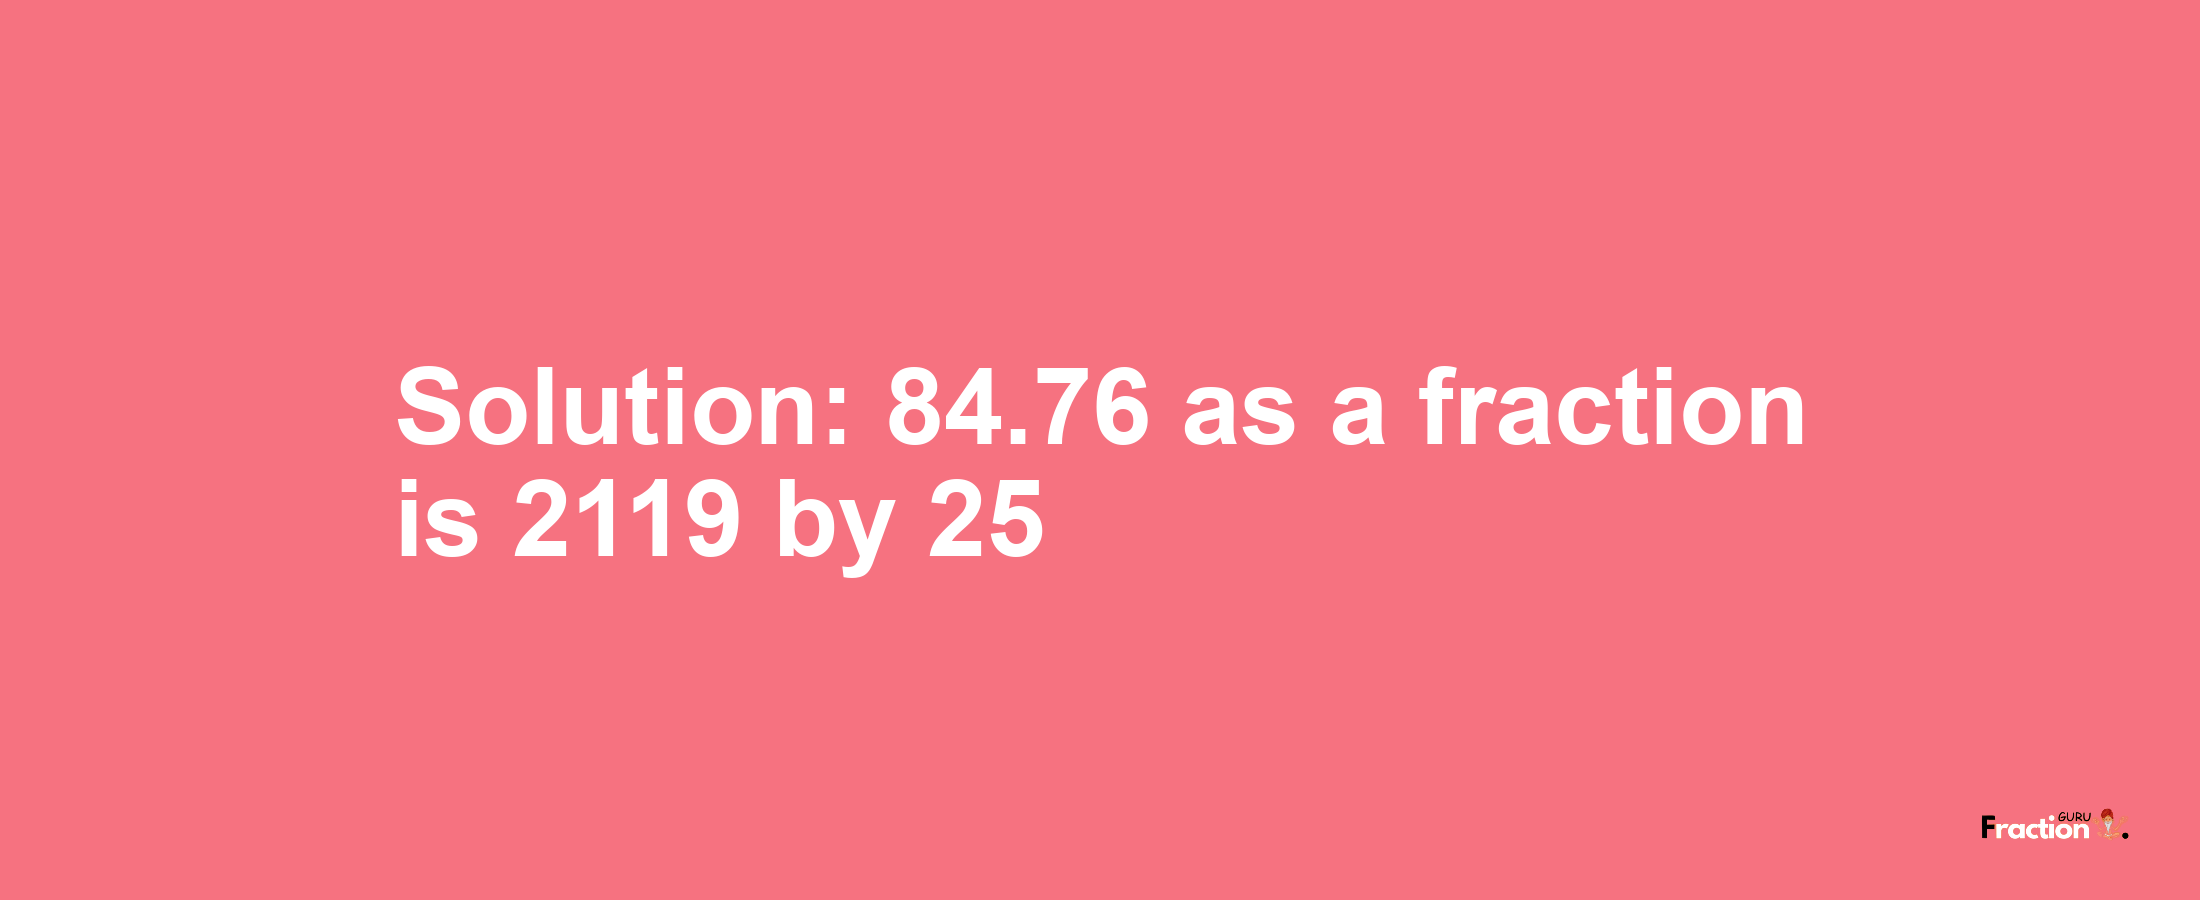 Solution:84.76 as a fraction is 2119/25